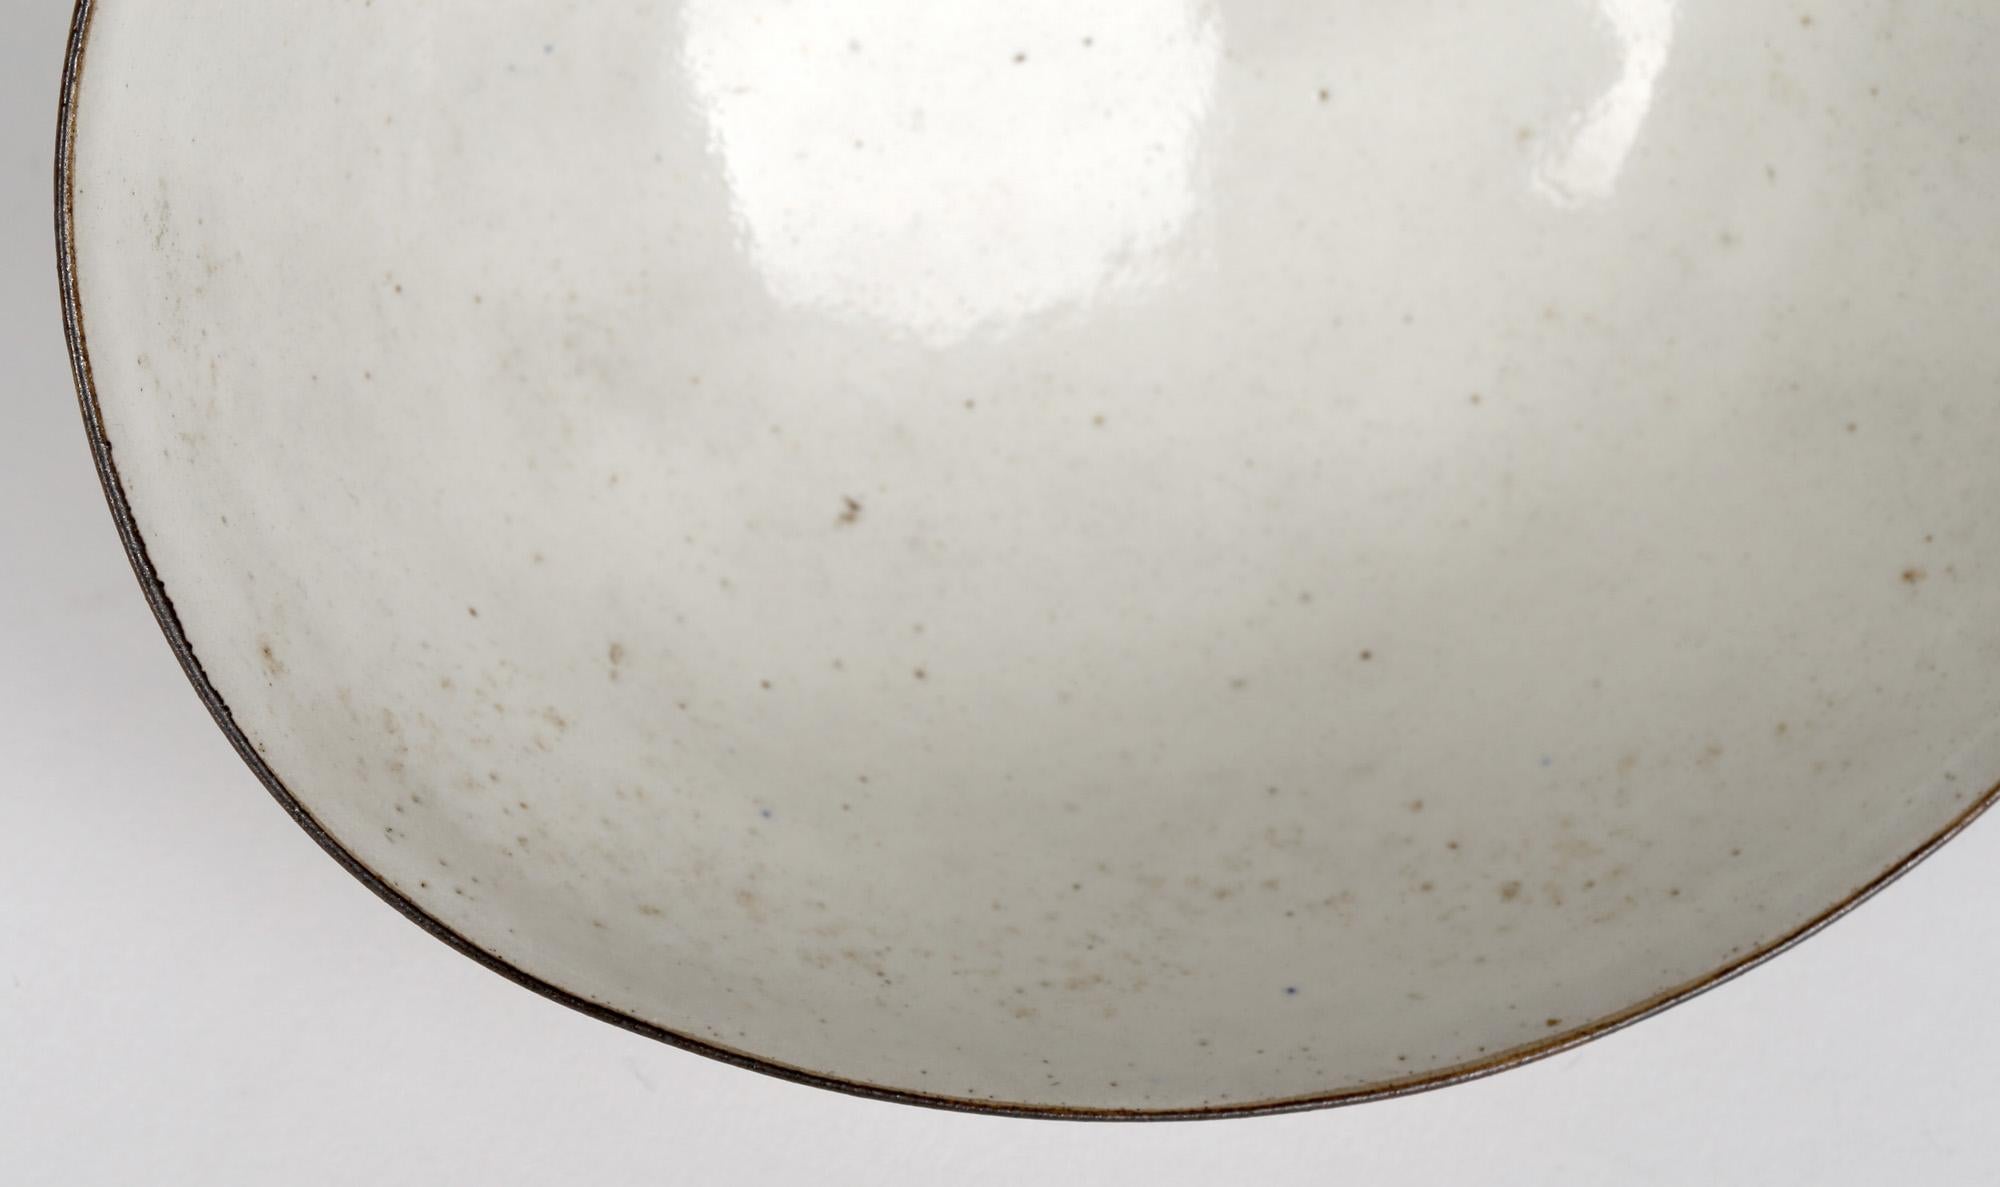 Stoneware oatmeal glazed bowl with small crater and speckled inclusions with a wavy rim with a fine manganese glazed edge by Lucie Rie (Austrian/British, 1902-1995) dating from around 1965. Impressed LR seal mark to the base.

In good condition.
 